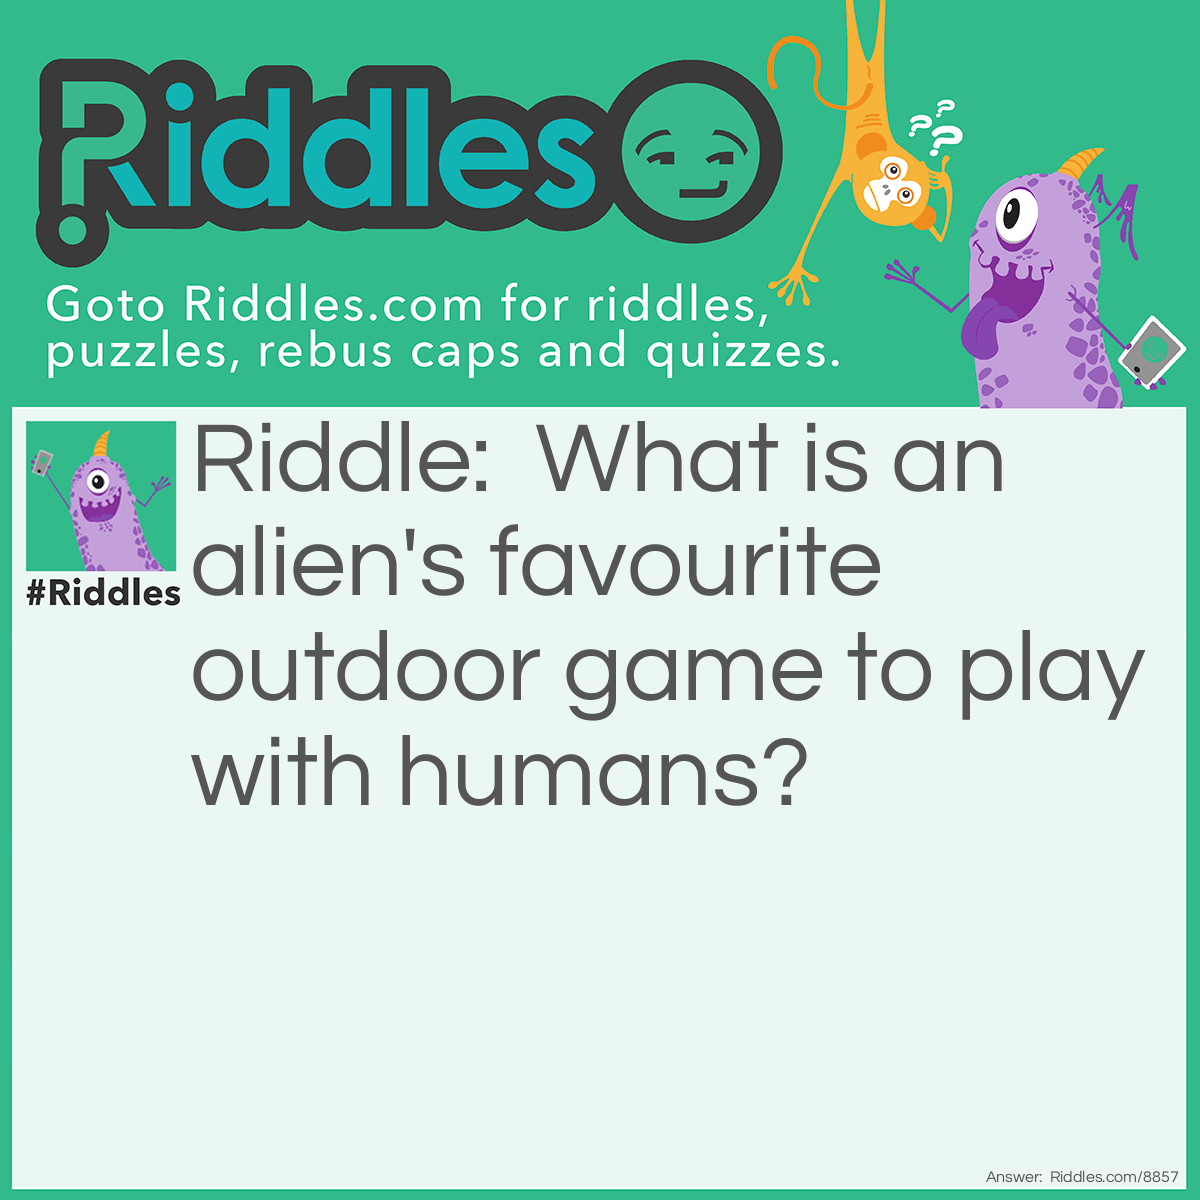 Riddle: What is an alien's favourite outdoor game to play with humans? Answer: Flying disc.